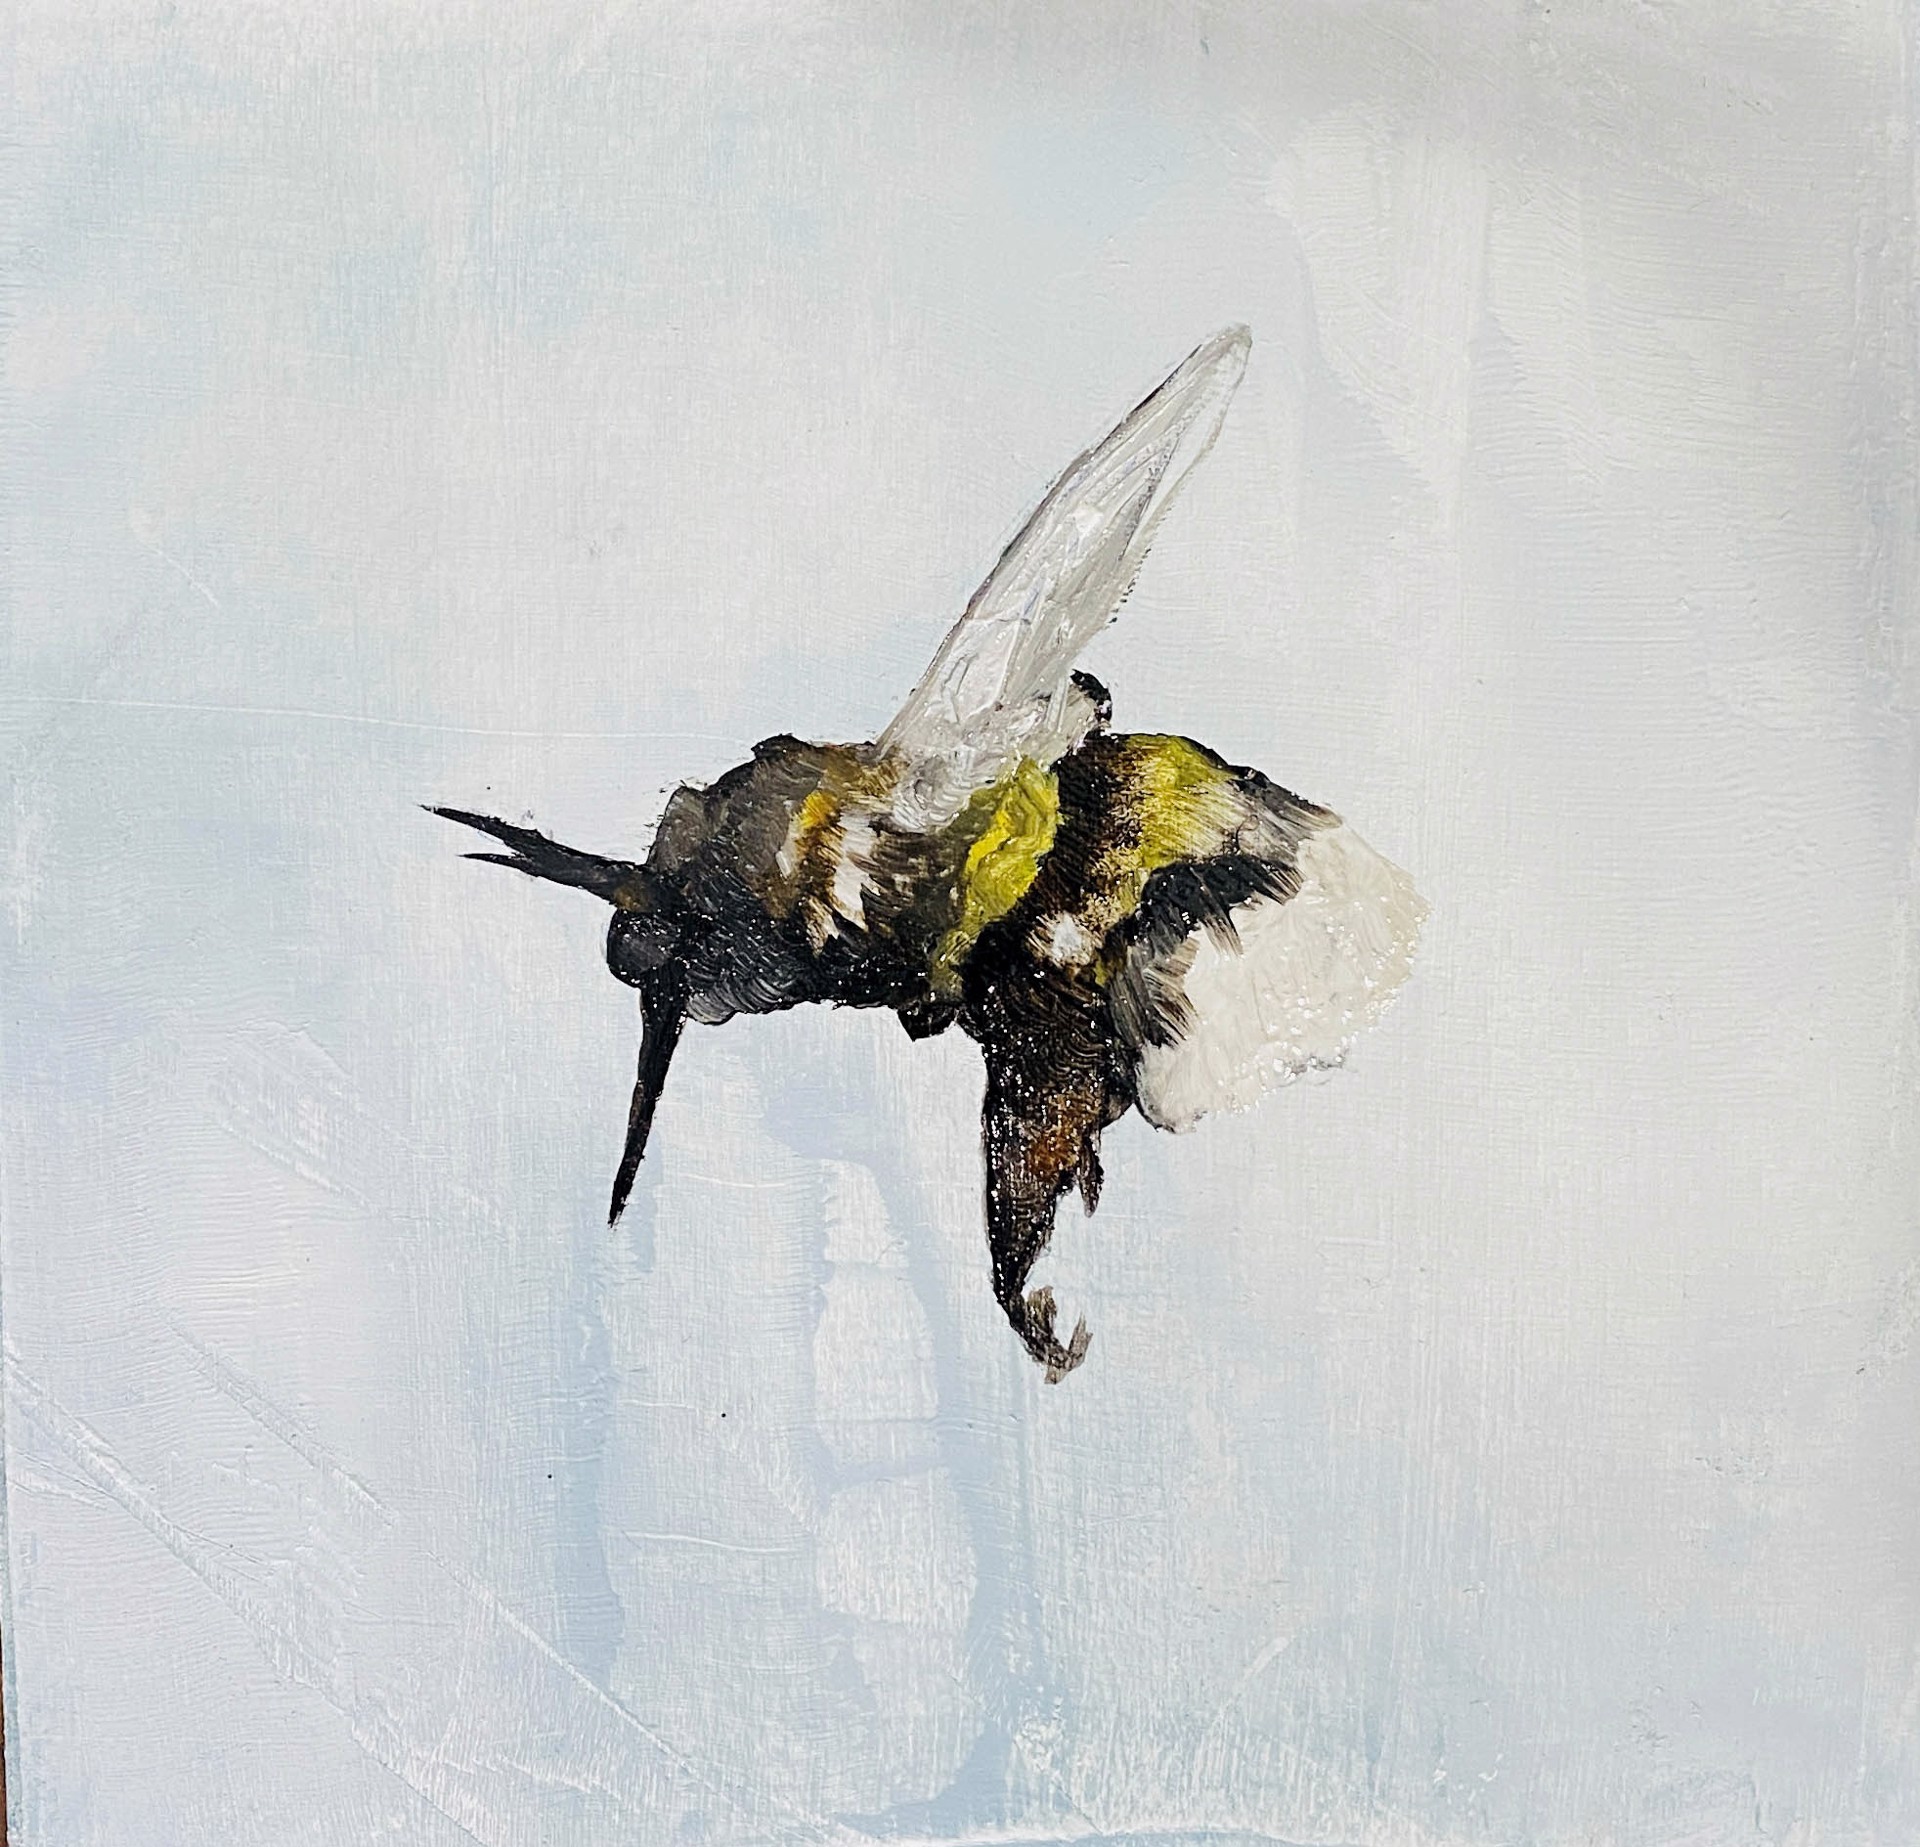 Original Oil Painting Featuring A Single Bumble Bee Over Abstract Blue Background